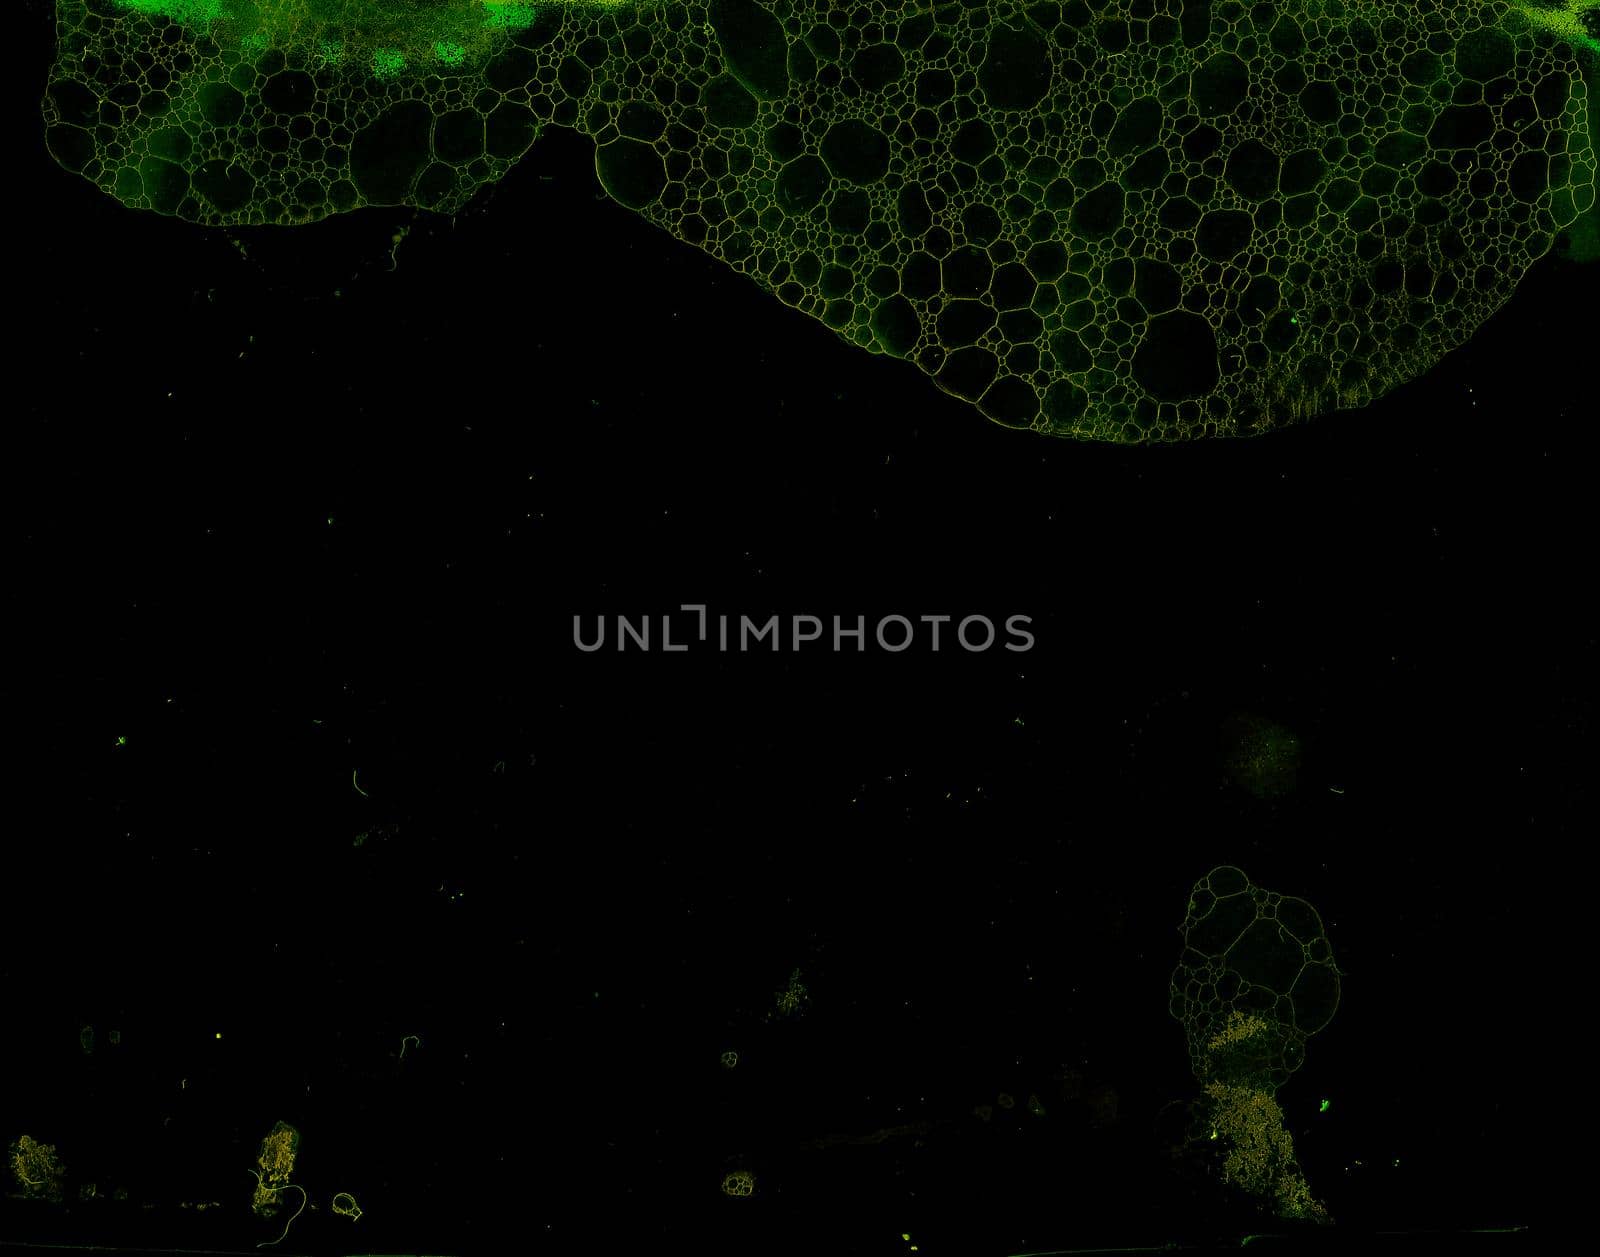 Abstract grunge cellular background by Lirch